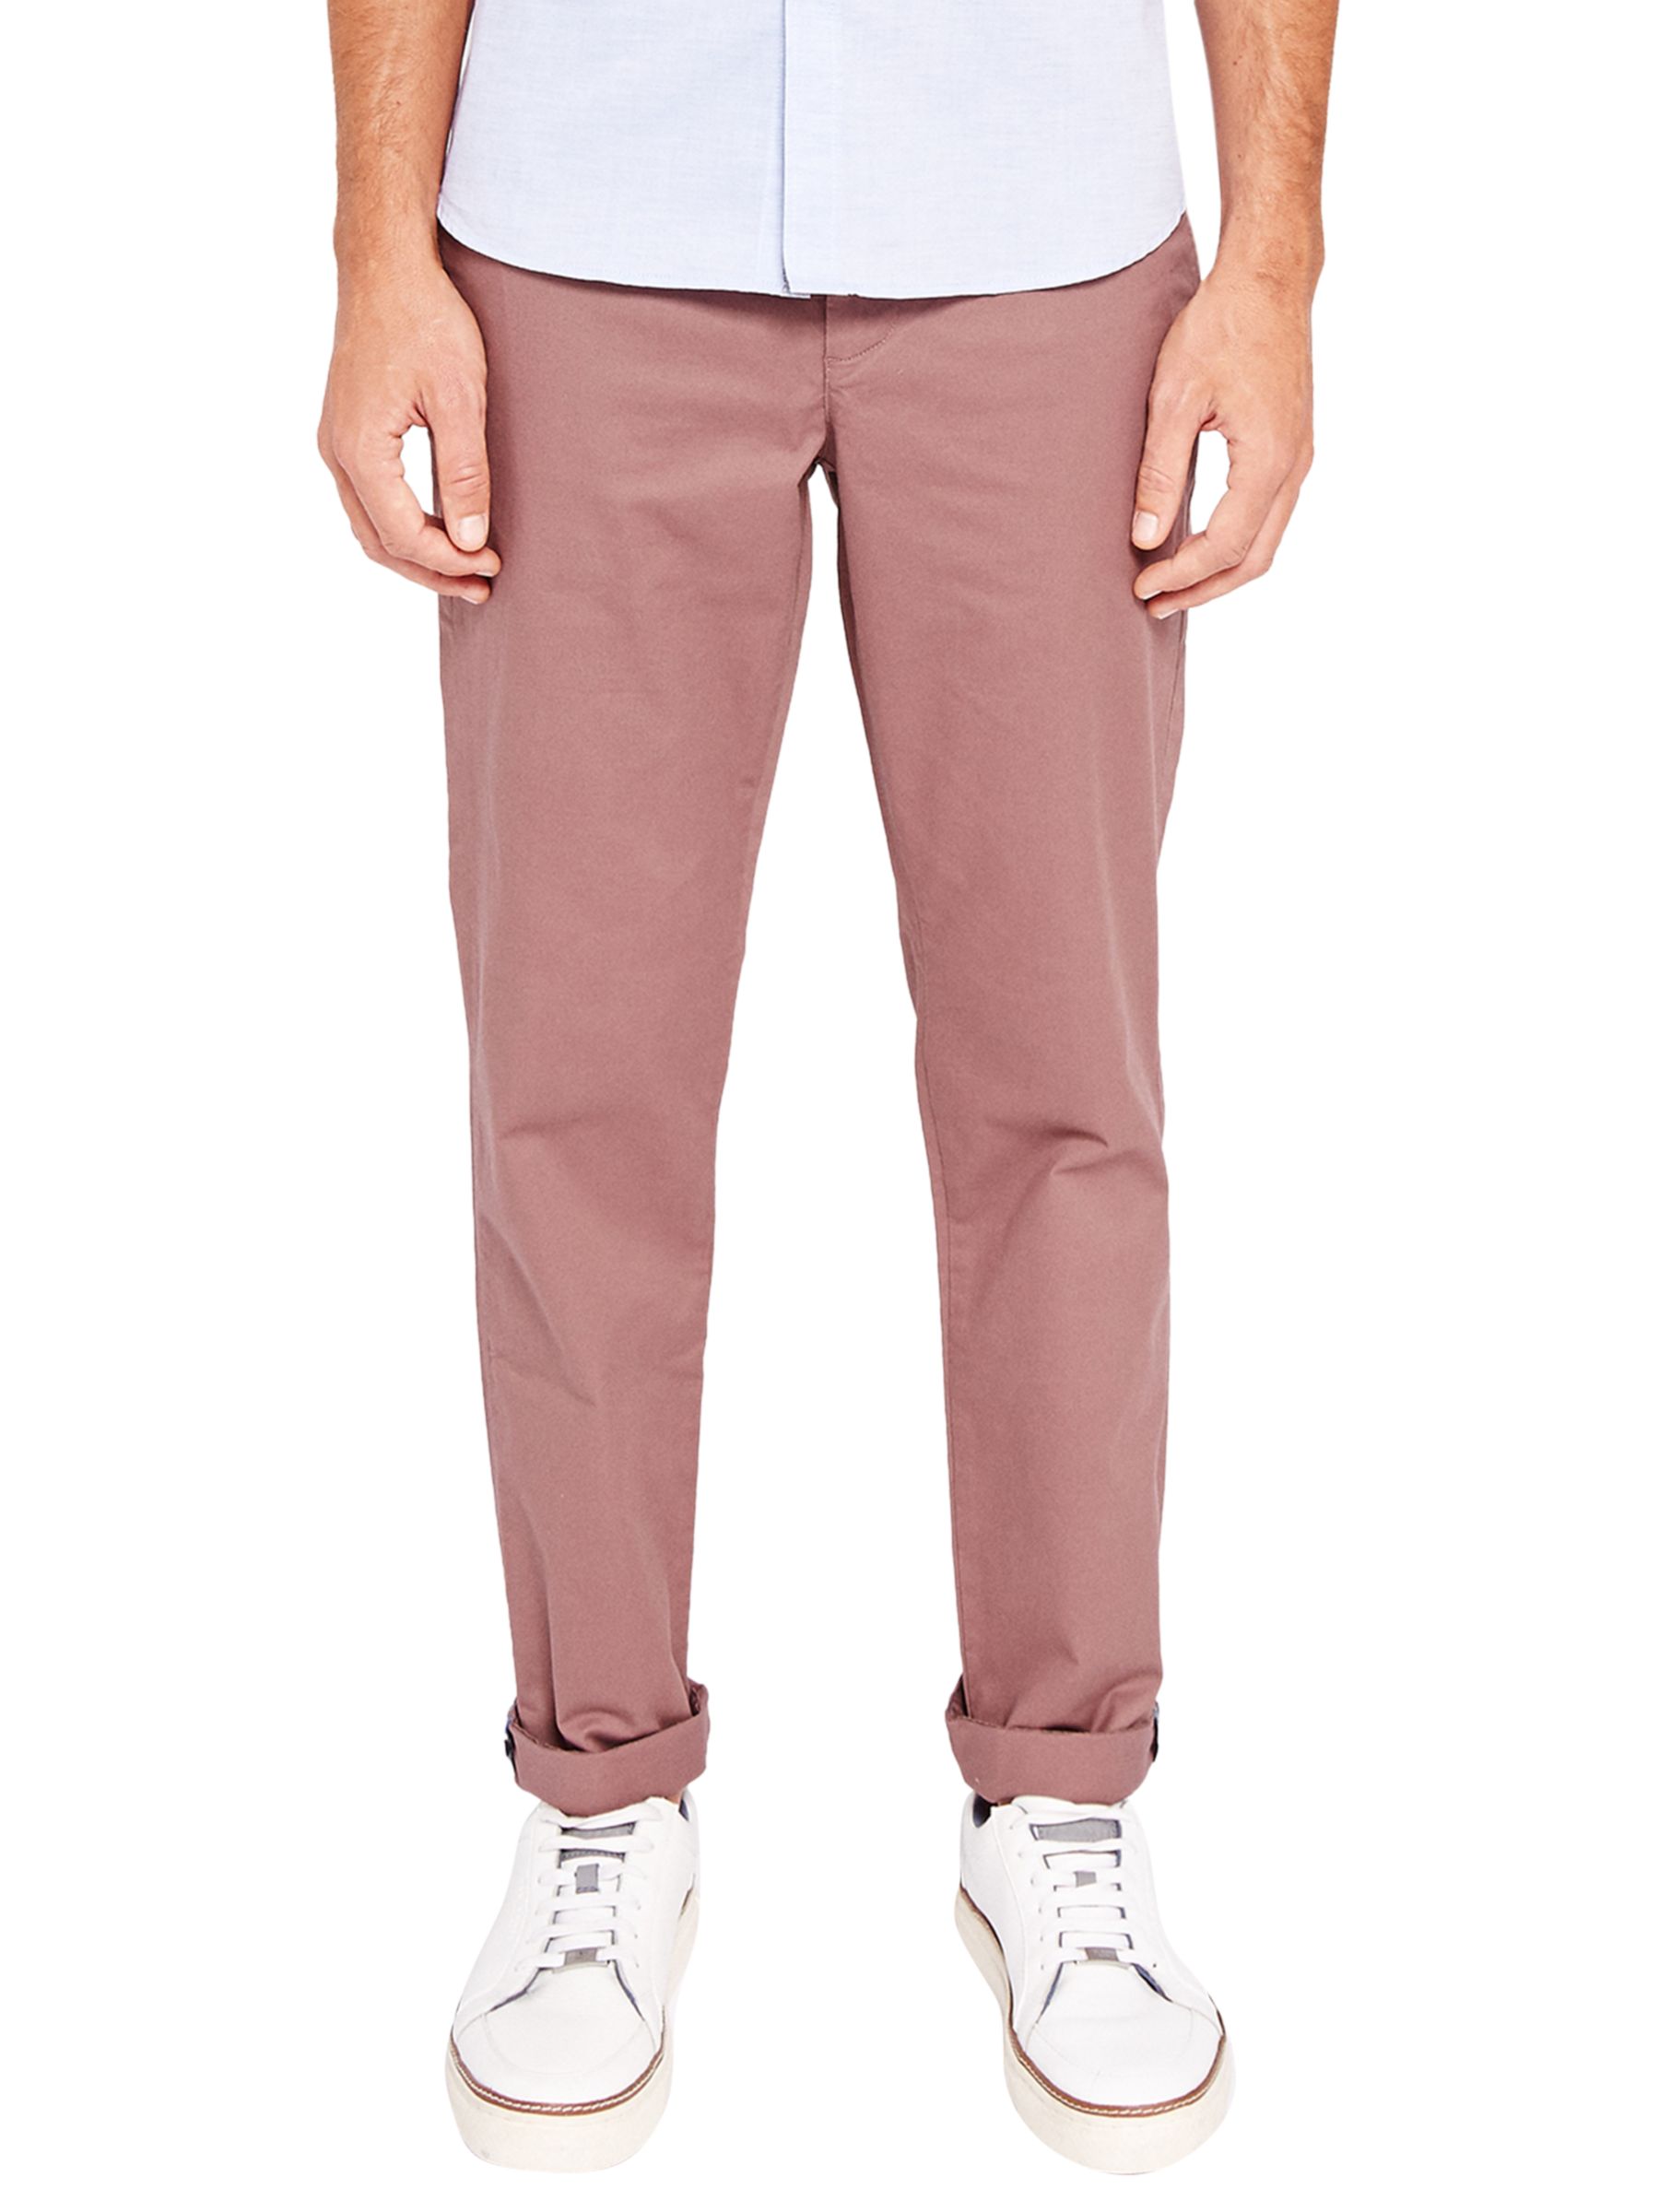 Ted Baker Clascor Chino Trousers, Pink, 34L